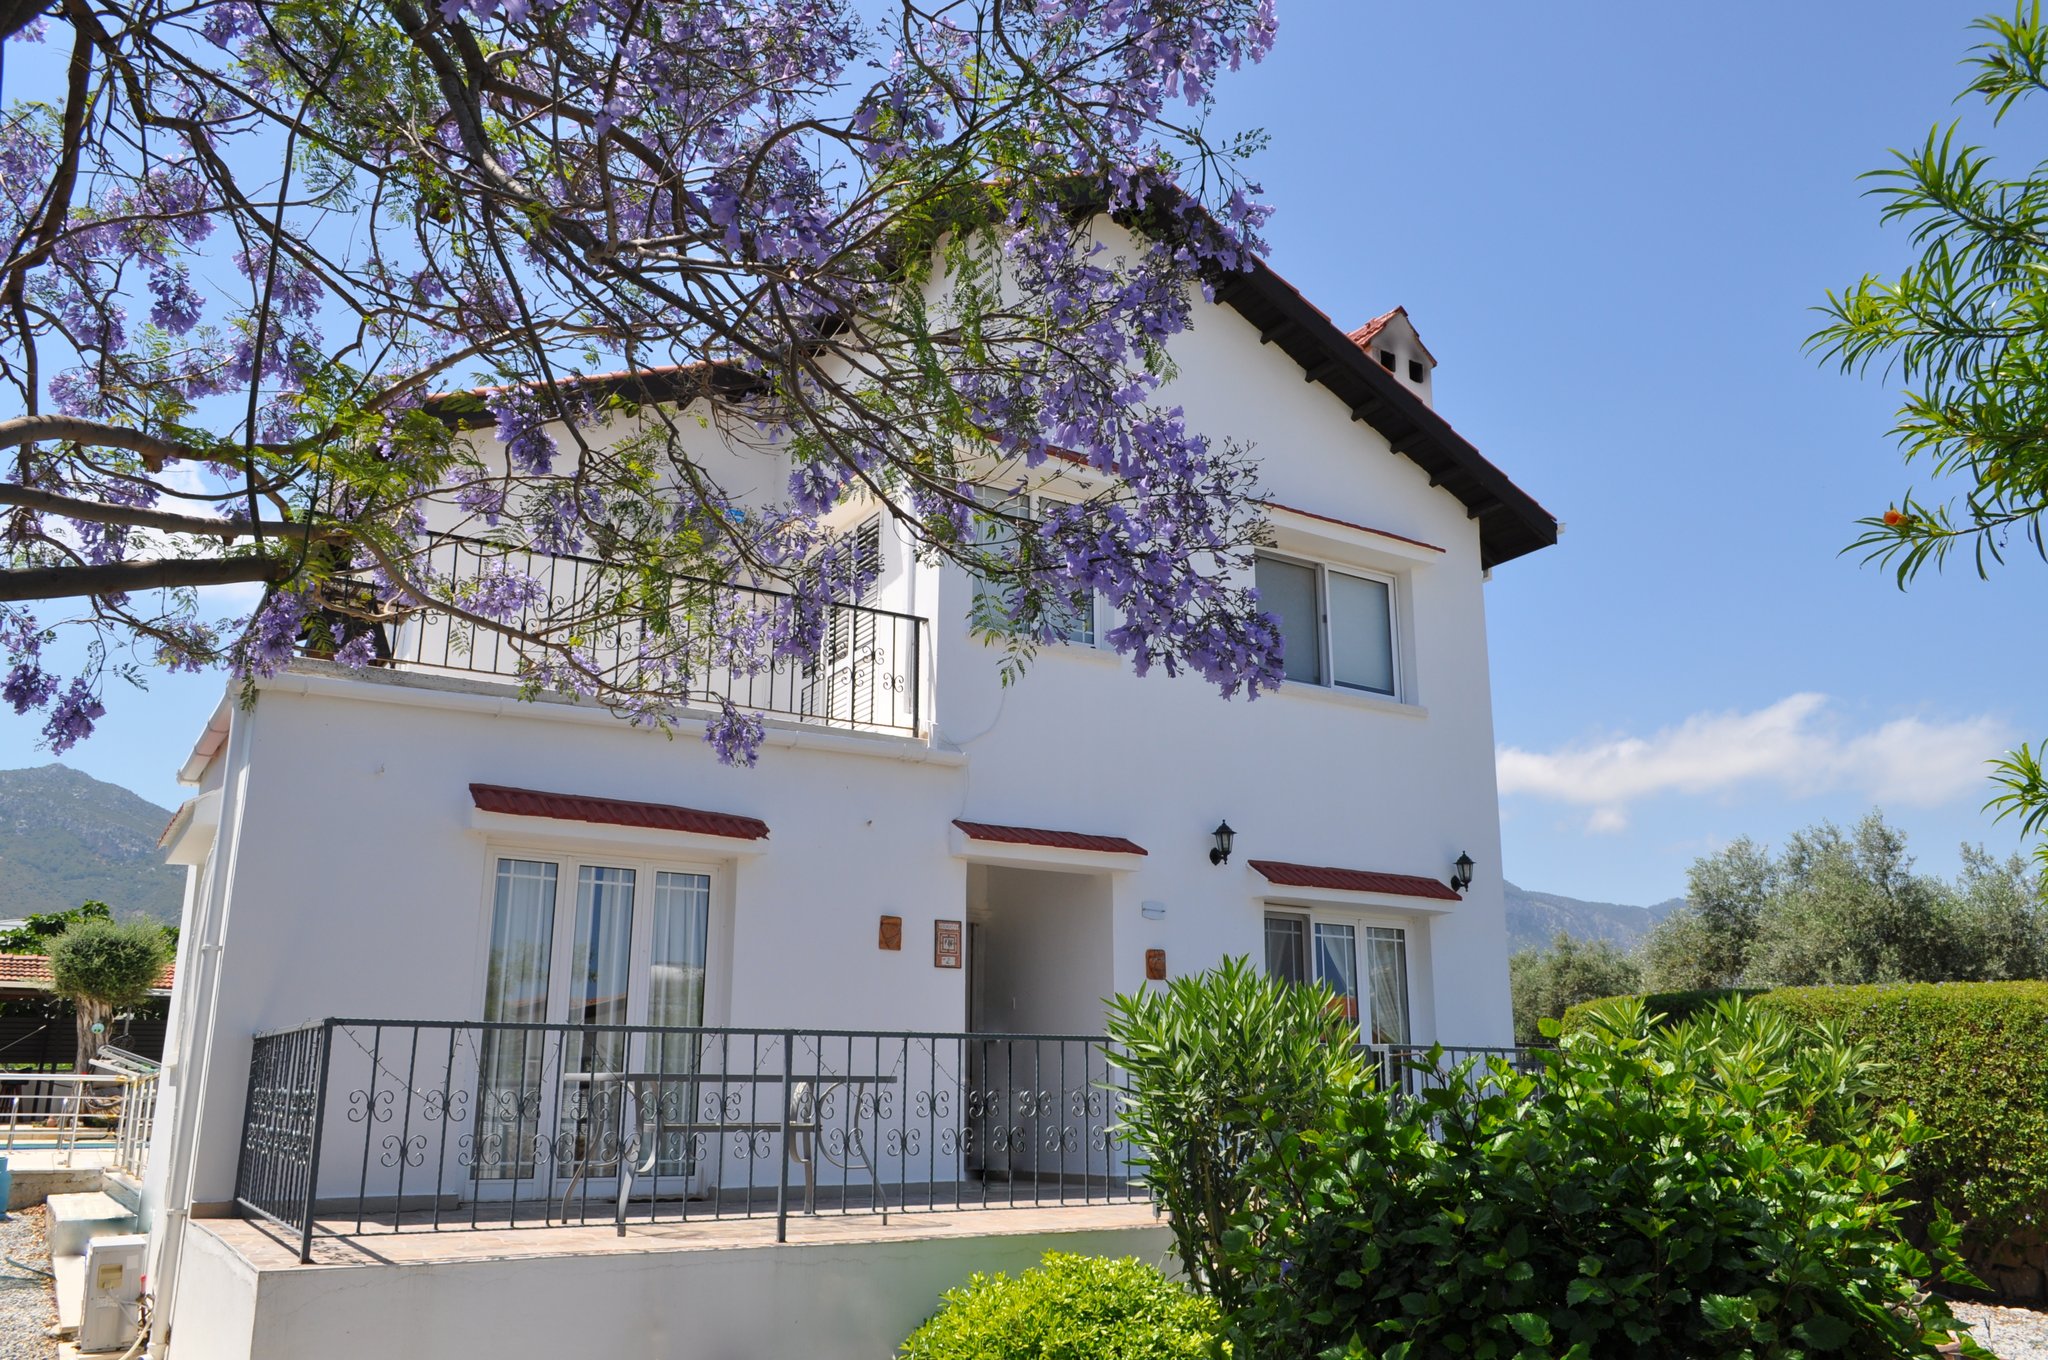 Spacious and Welcoming 4 Bedroom Villa with a Secure, Wrap Around Garden in a Popular Village Setting, Amidst the Breath Taking Mountain Backdrop, Ozankoy